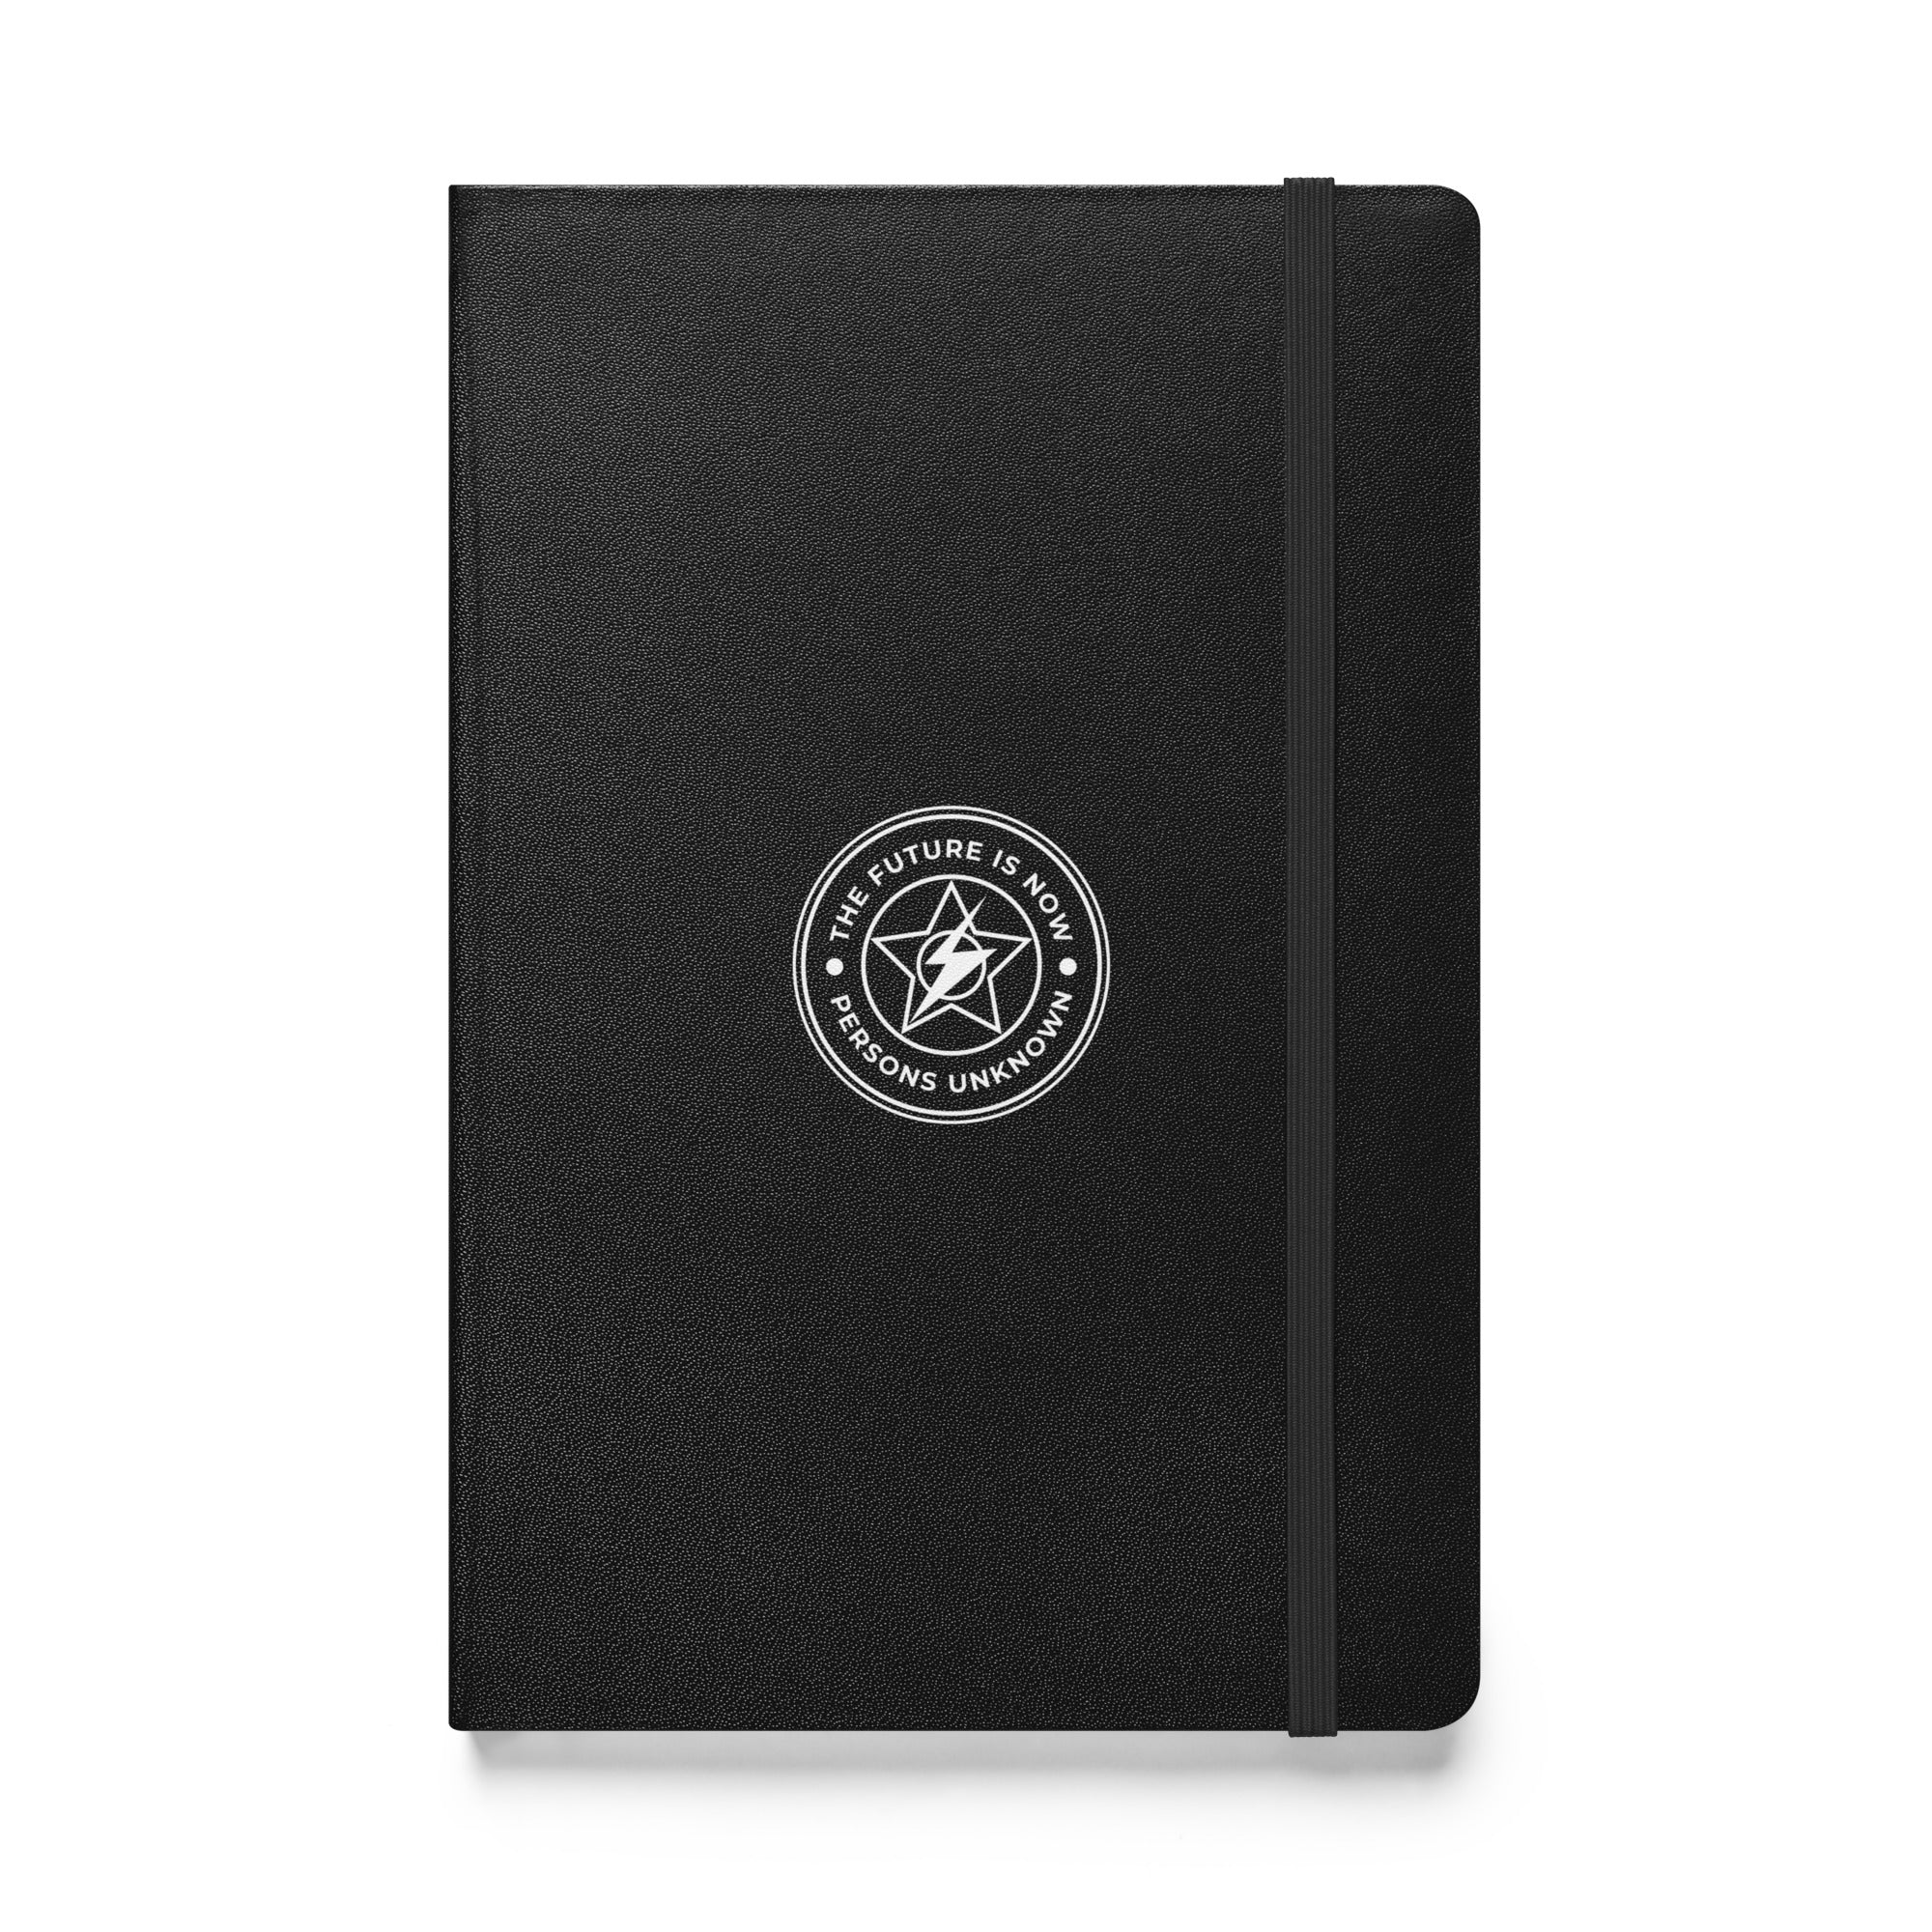 The Future is Now - Note Book